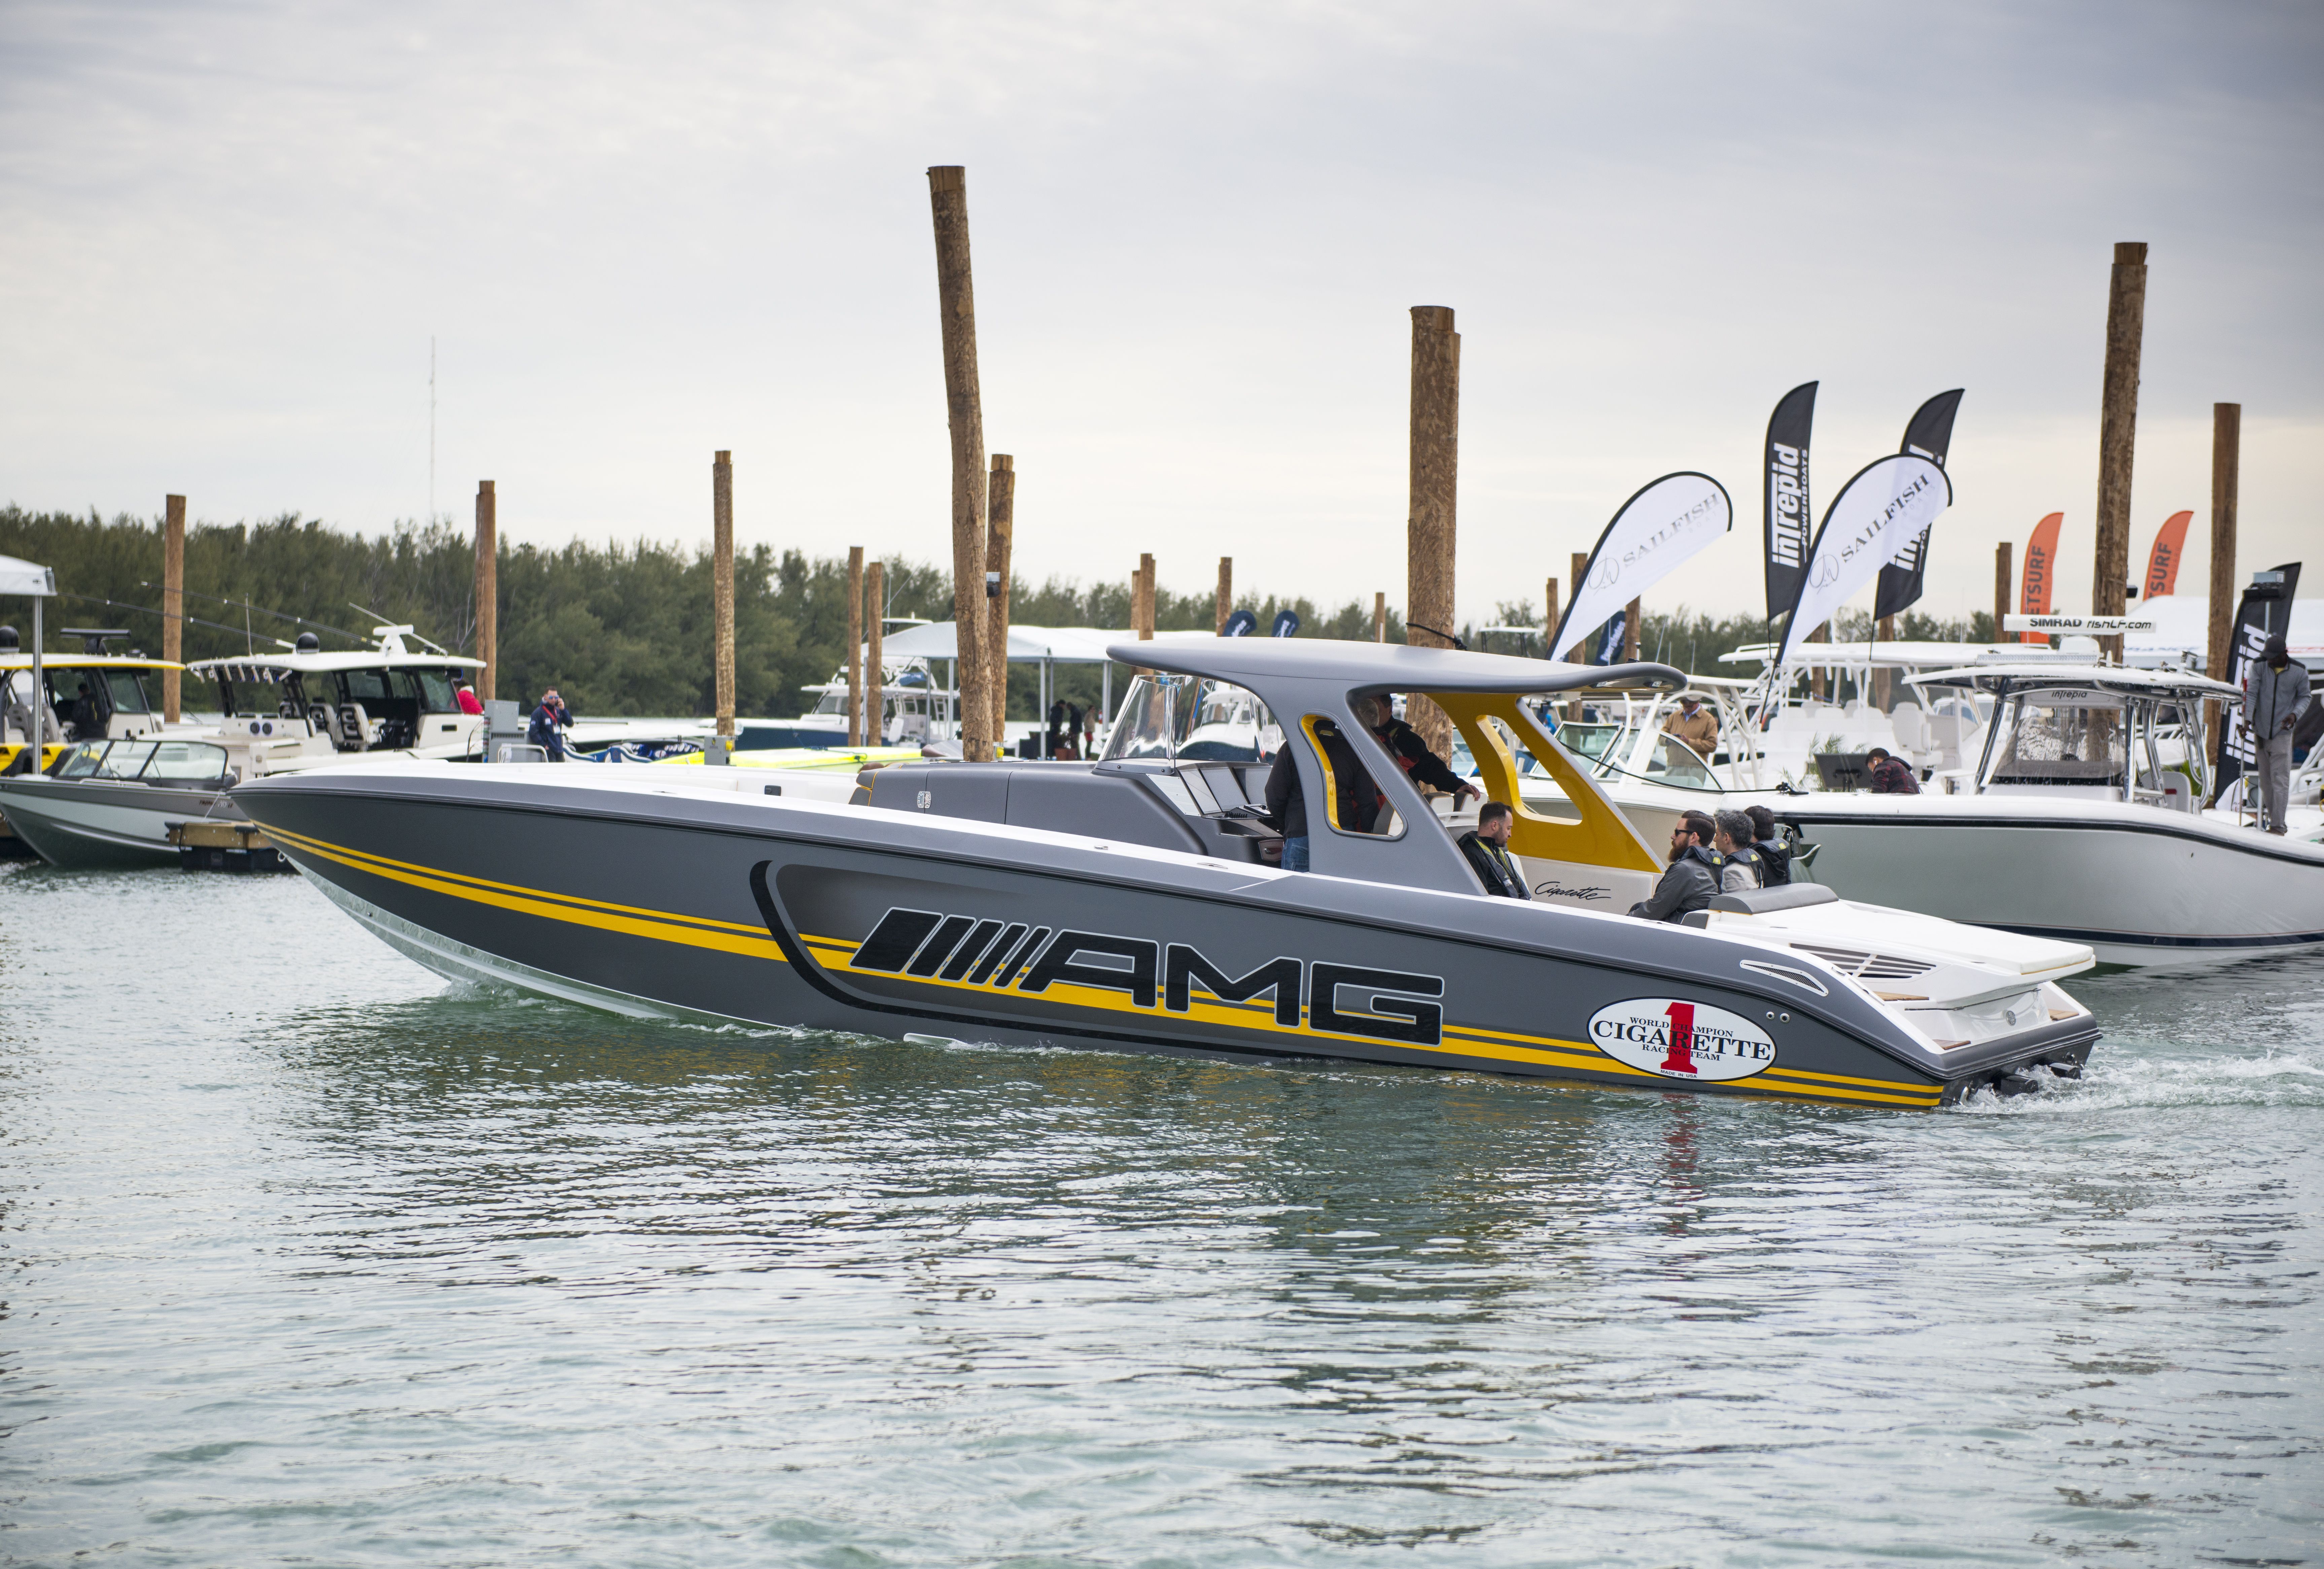 Mercedes Amg Cigarette Boat 2016 Mercedes Amg Cigarette Boat Cigarette boats for sale in florida, illinois, wisconsin, new york. town country magazine